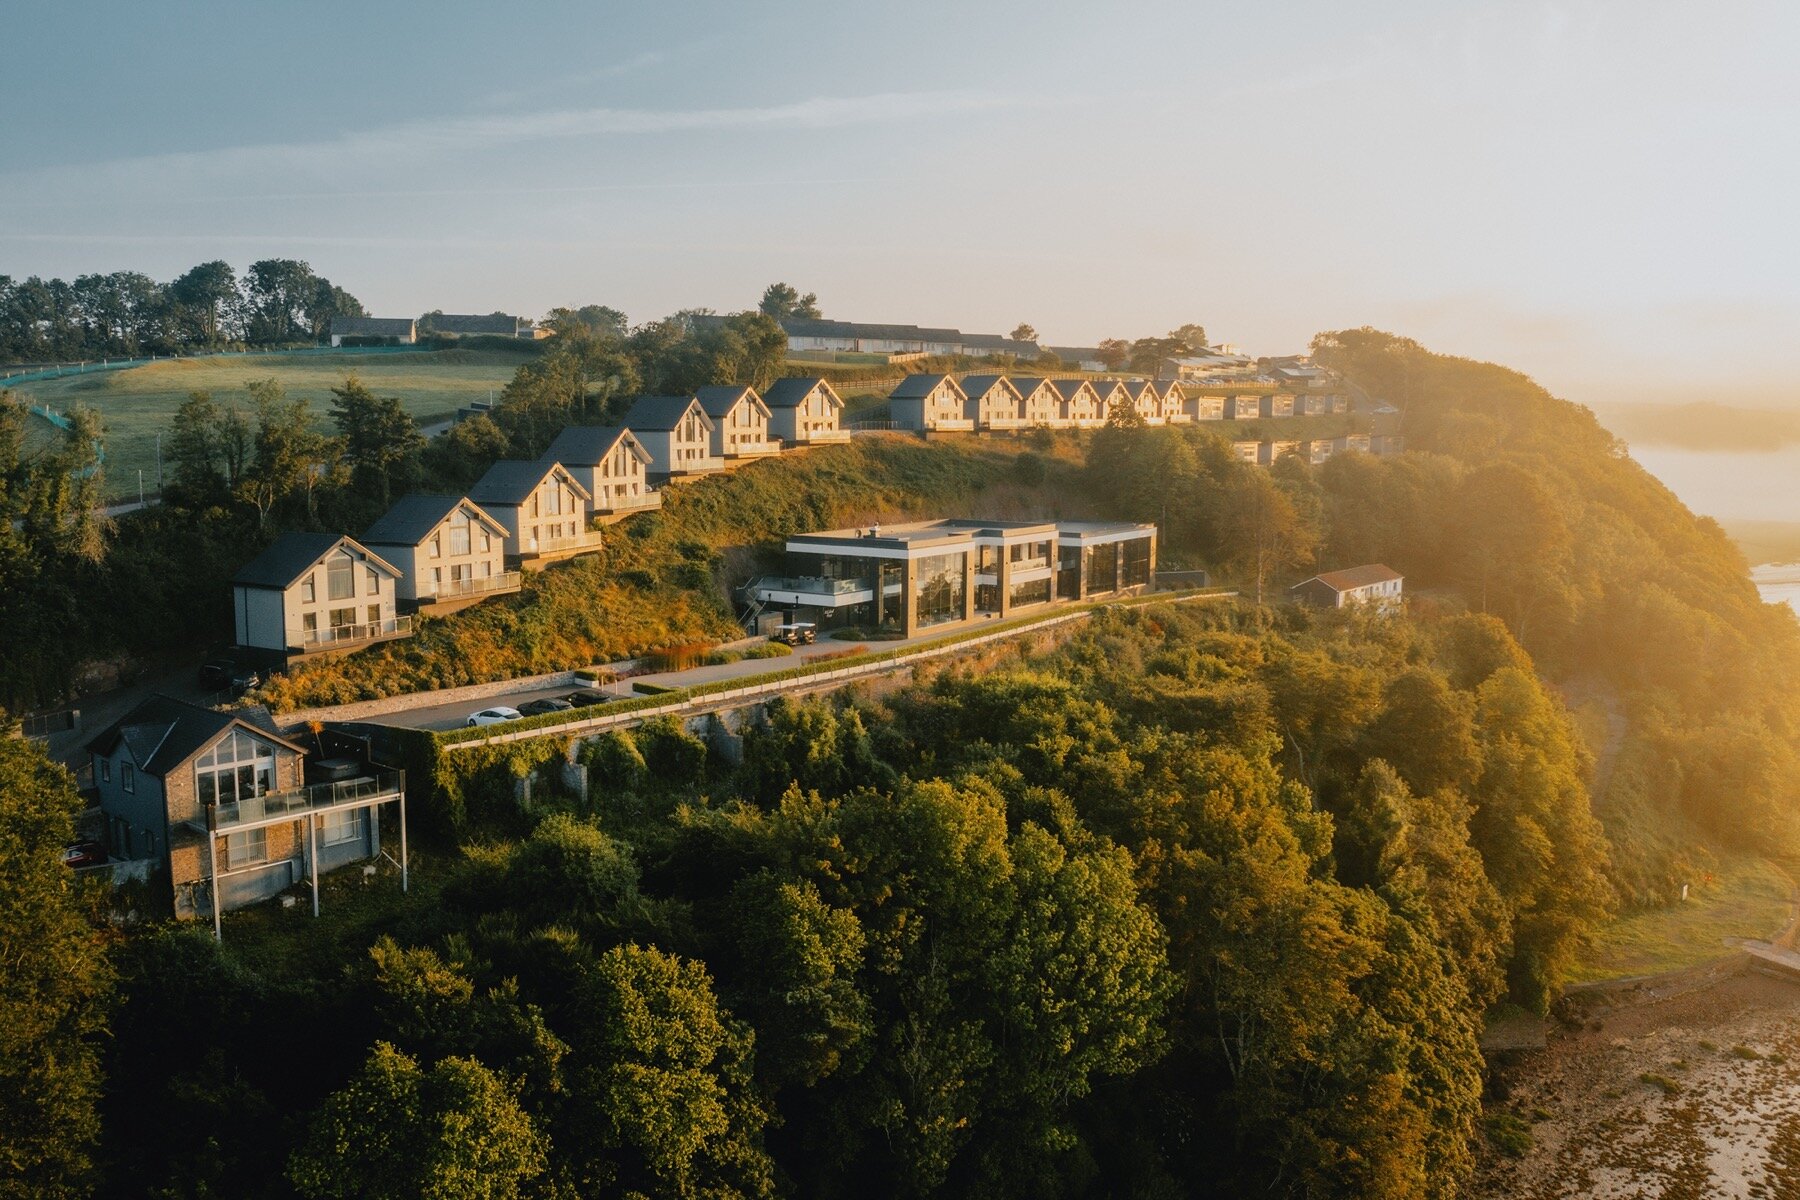 Home from Home - Dylan Coastal Resort @llcollectionuk 💛

Dylan Coastal Resort in Carmarthenshire is home to some of the most exclusive holiday homes for sale in Wales overlooking the Taf Estuary

Read more...
thecheshiremagazine.co.uk/features/home-